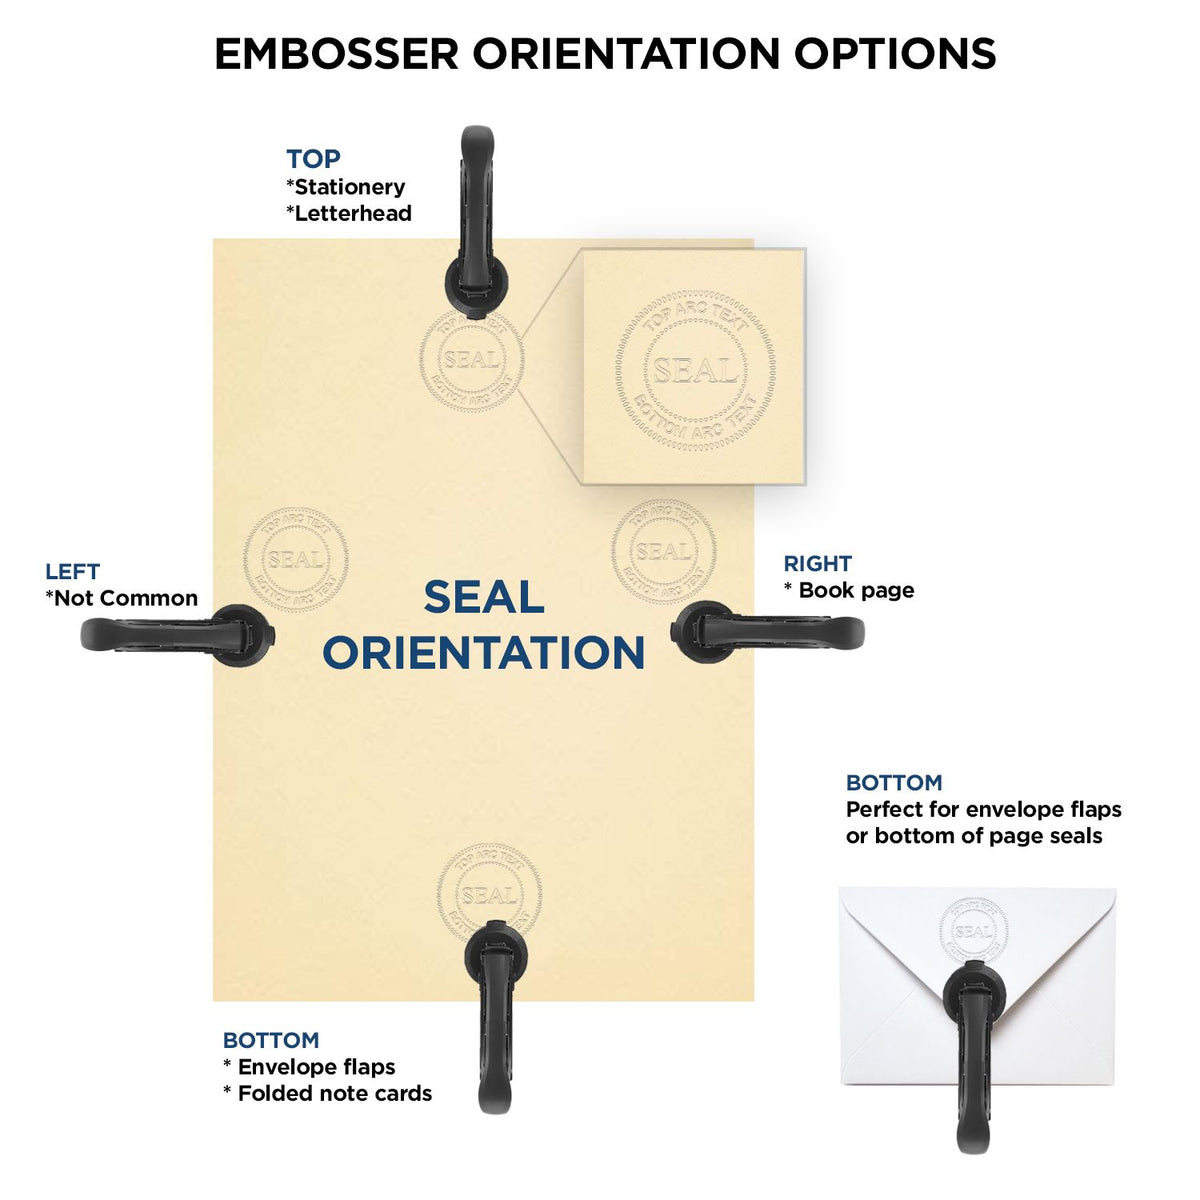 An infographic for the Gift Idaho Land Surveyor Seal showing embosser orientation, this is showing examples of a top, bottom, right and left insert.